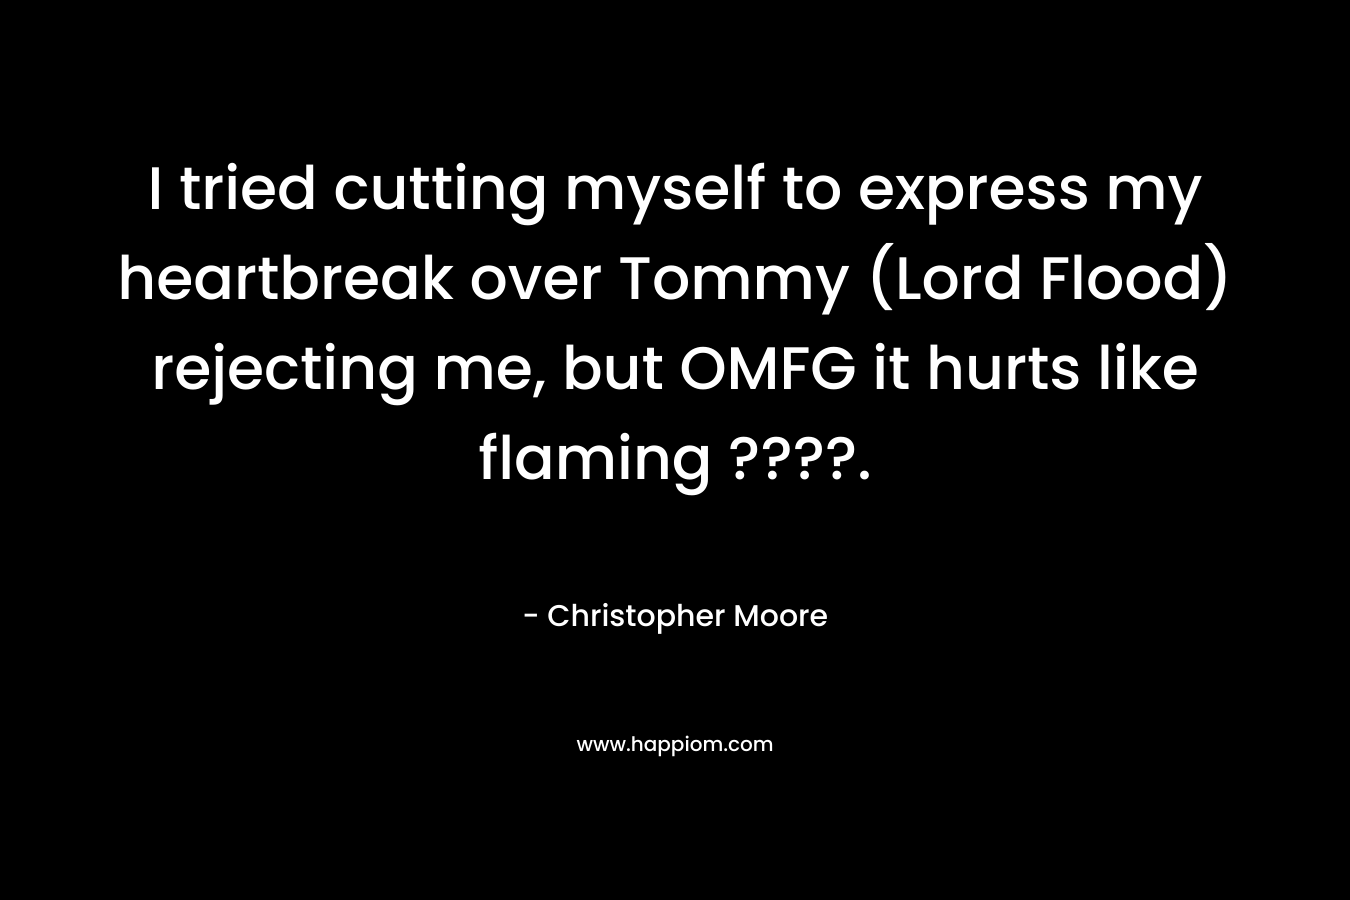 I tried cutting myself to express my heartbreak over Tommy (Lord Flood) rejecting me, but OMFG it hurts like flaming ????.